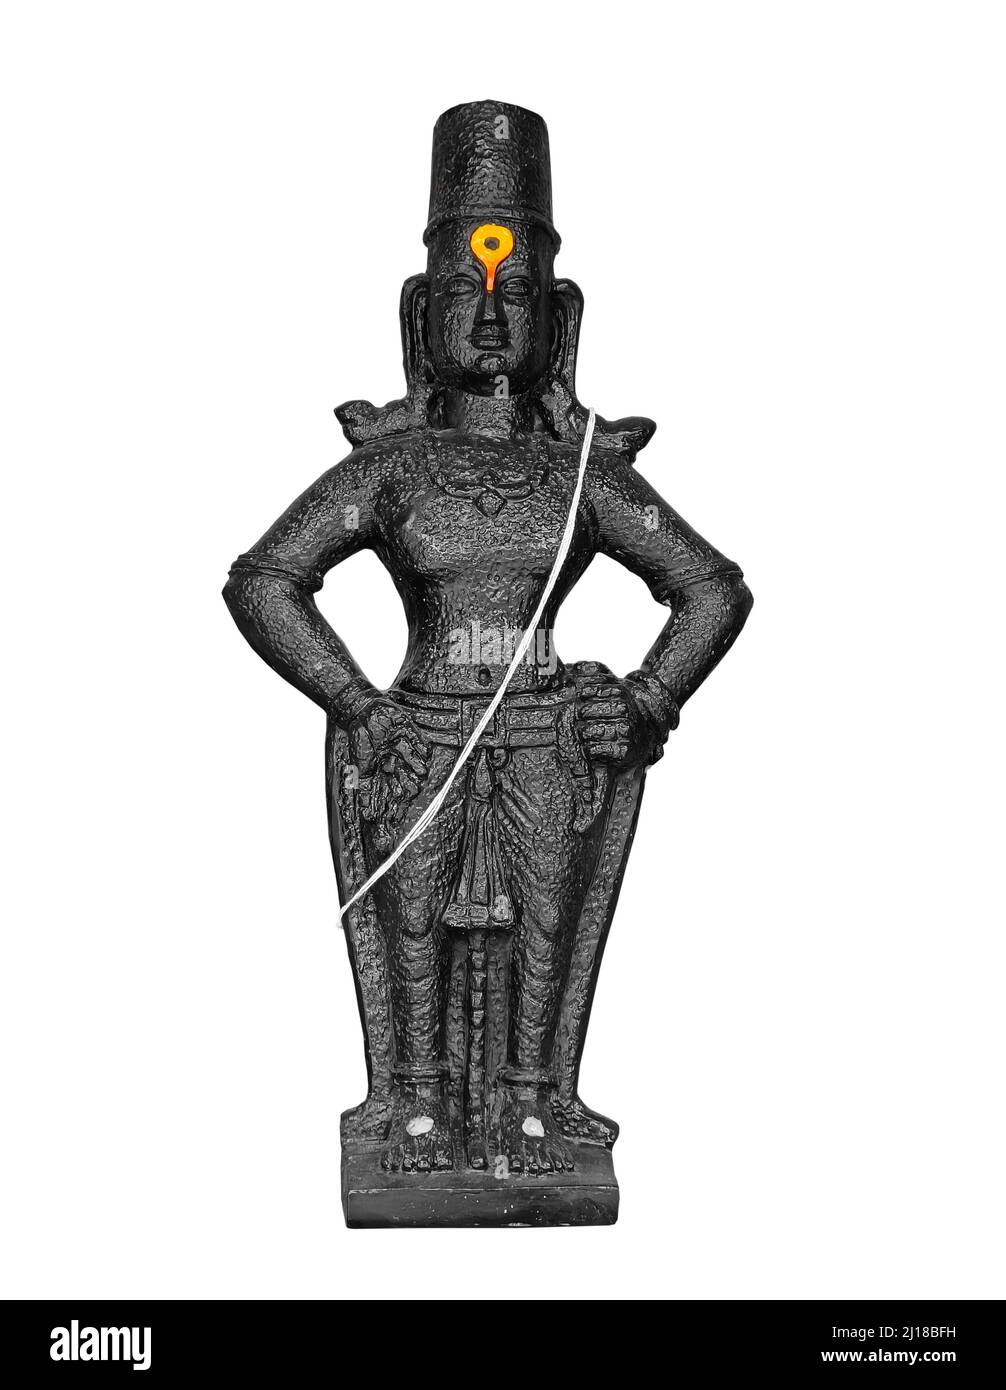 Vithoba with consorts | Bronzes of India - A personal collection